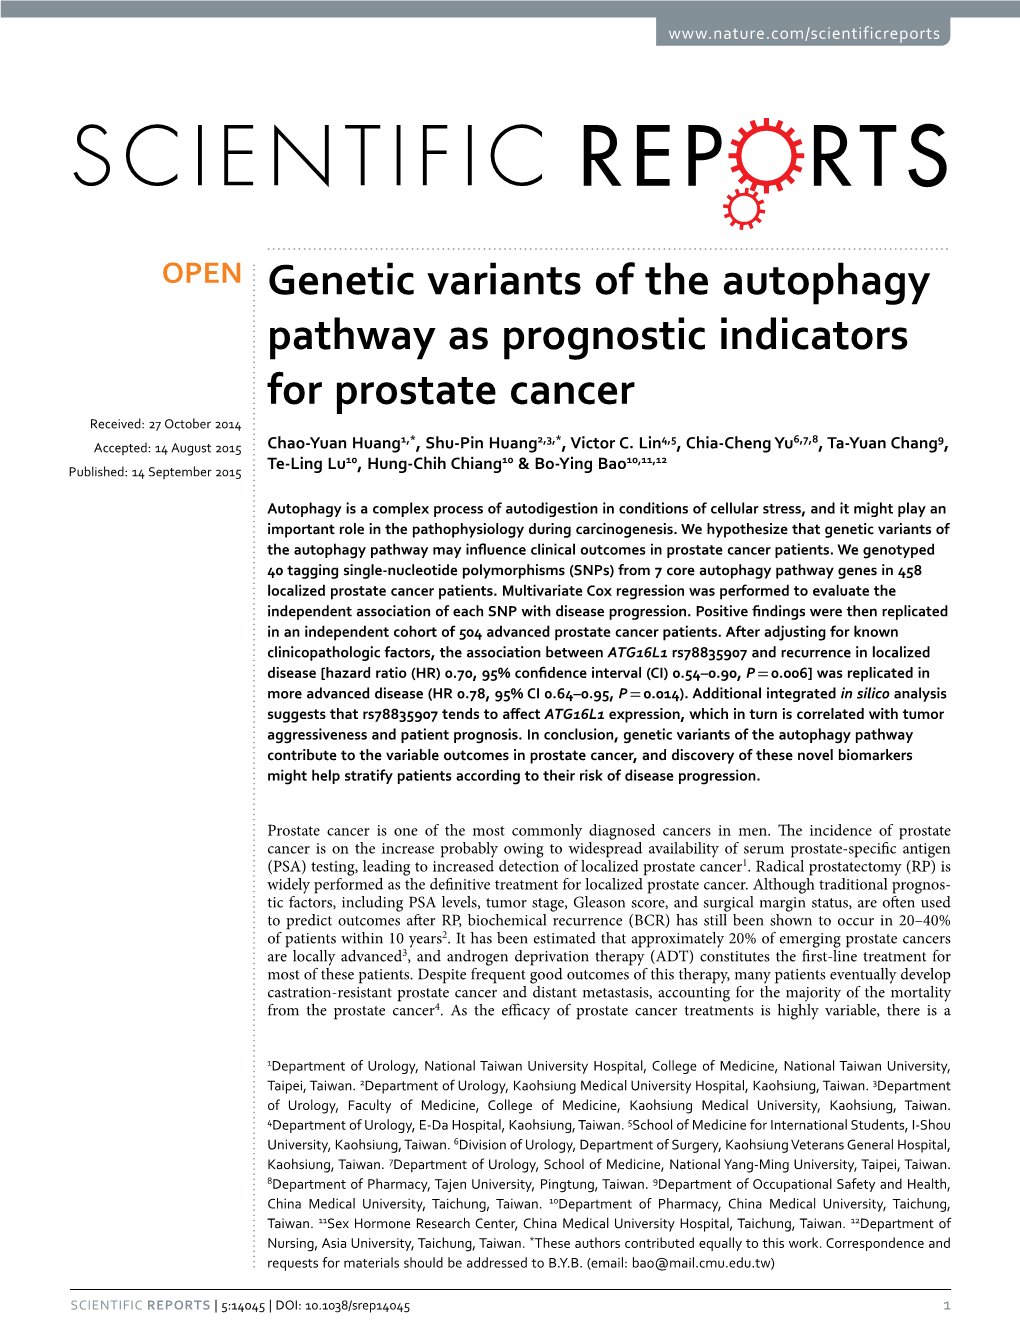 Genetic Variants of the Autophagy Pathway As Prognostic Indicators For